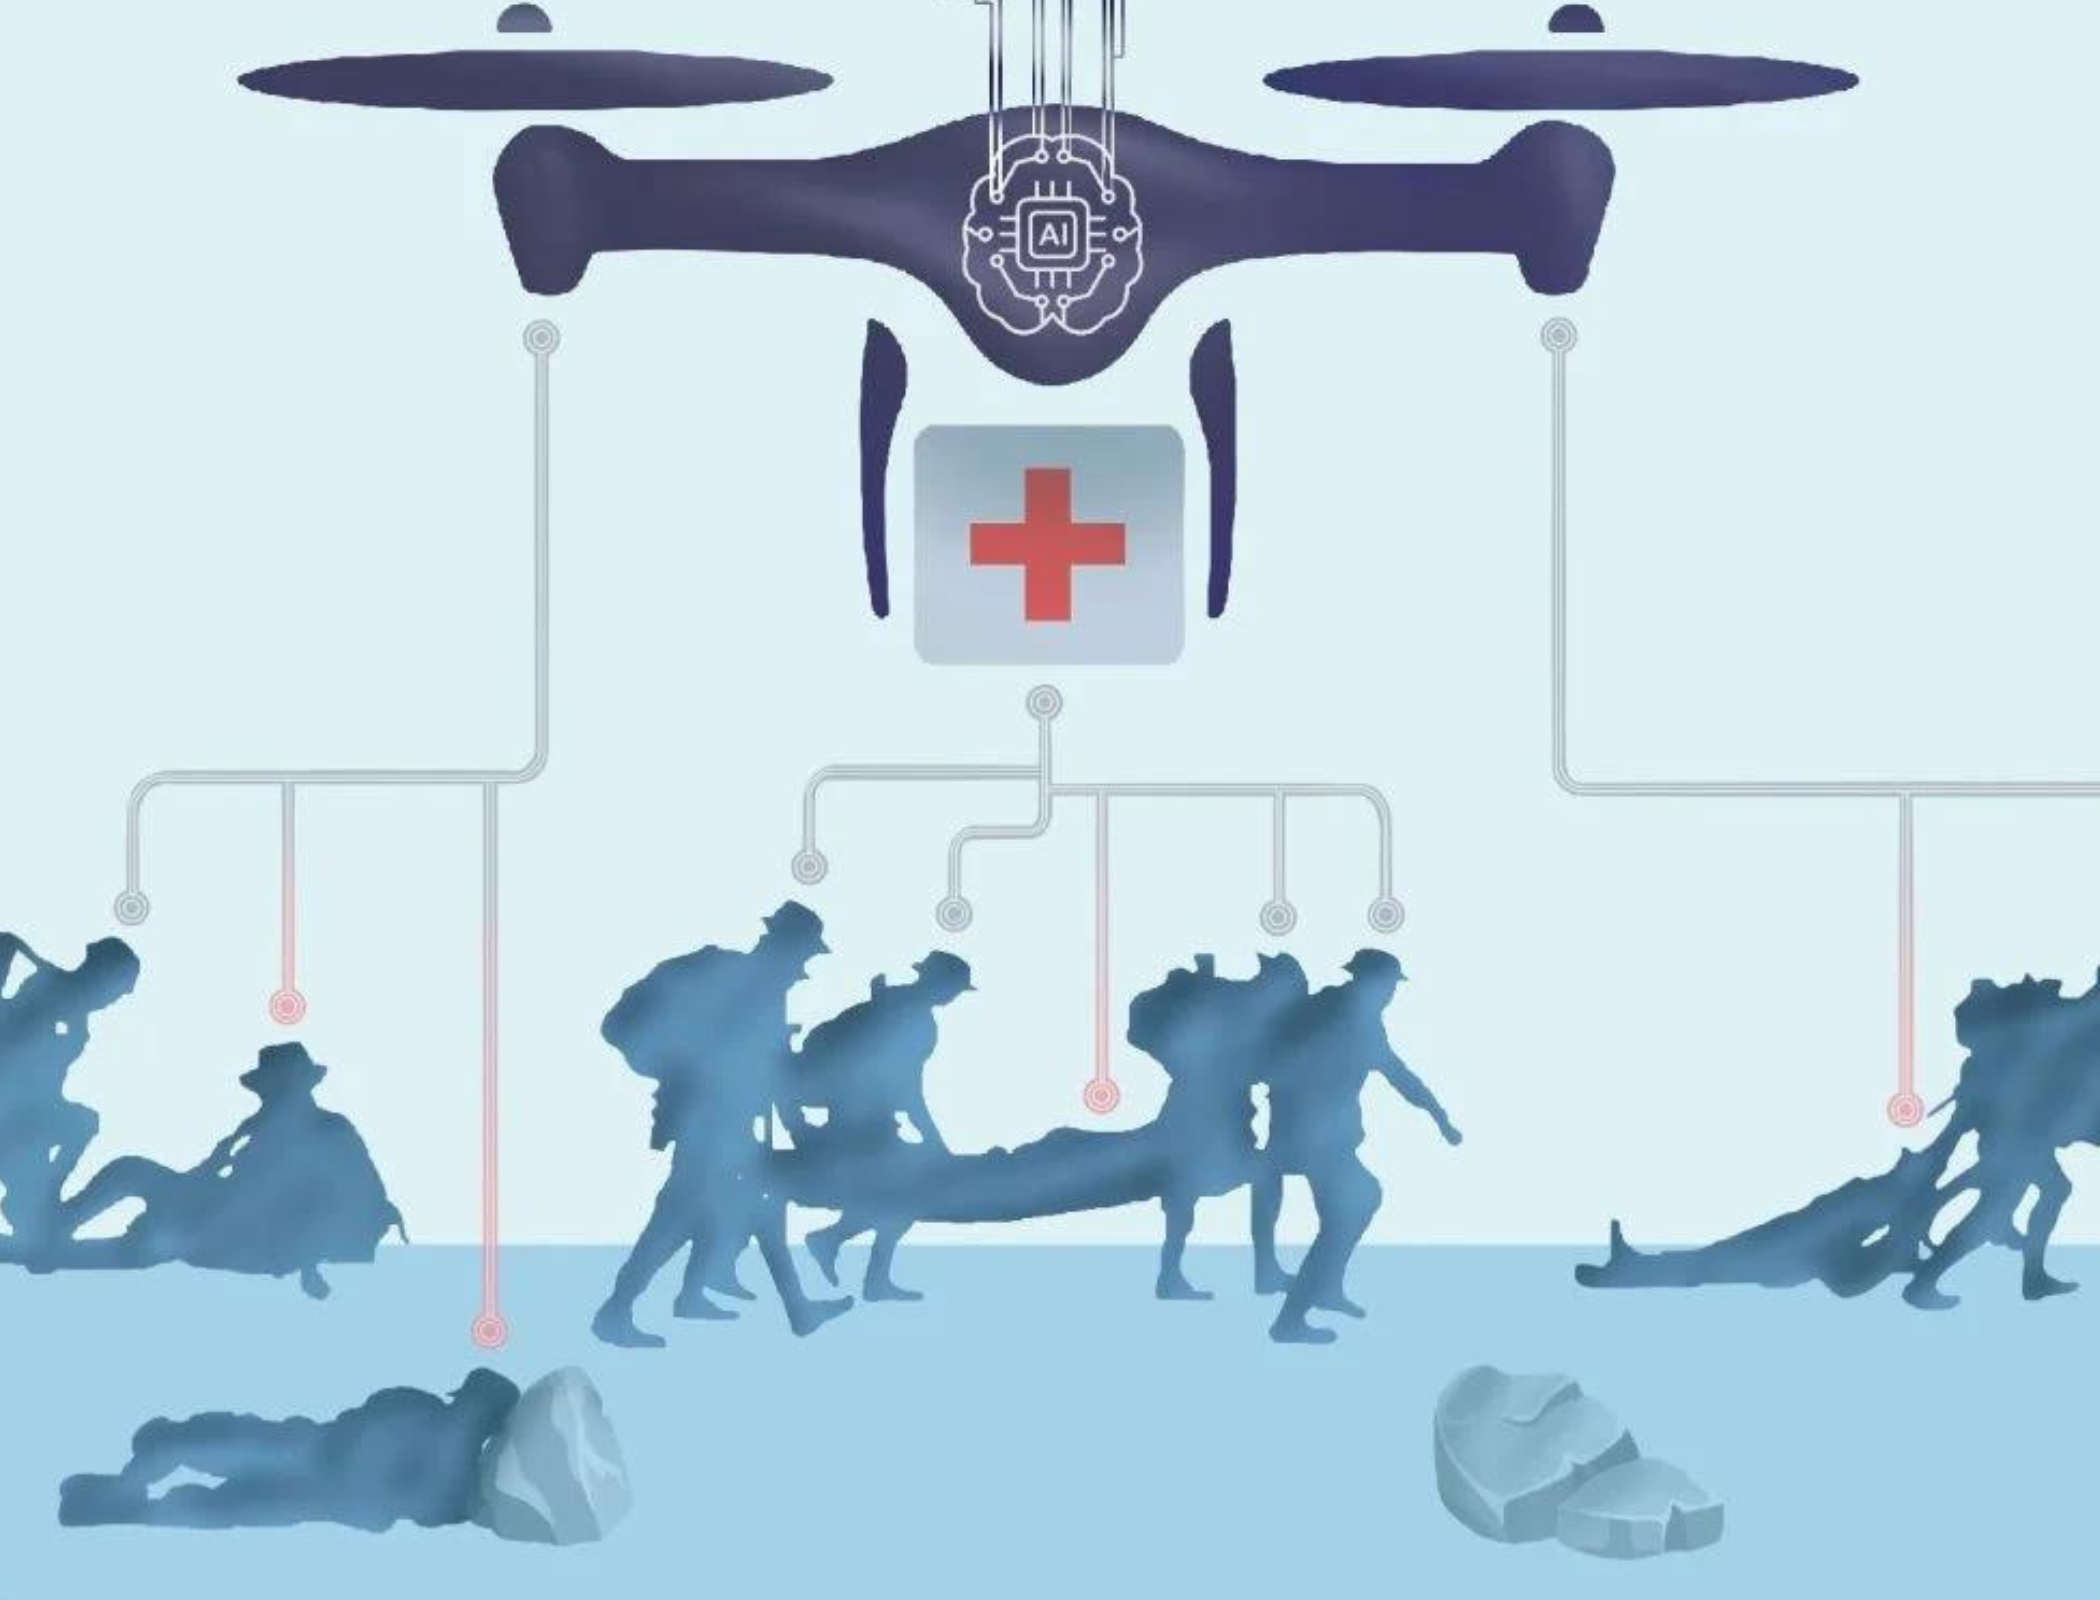 AI-powered drones could help save lives on the battlefield